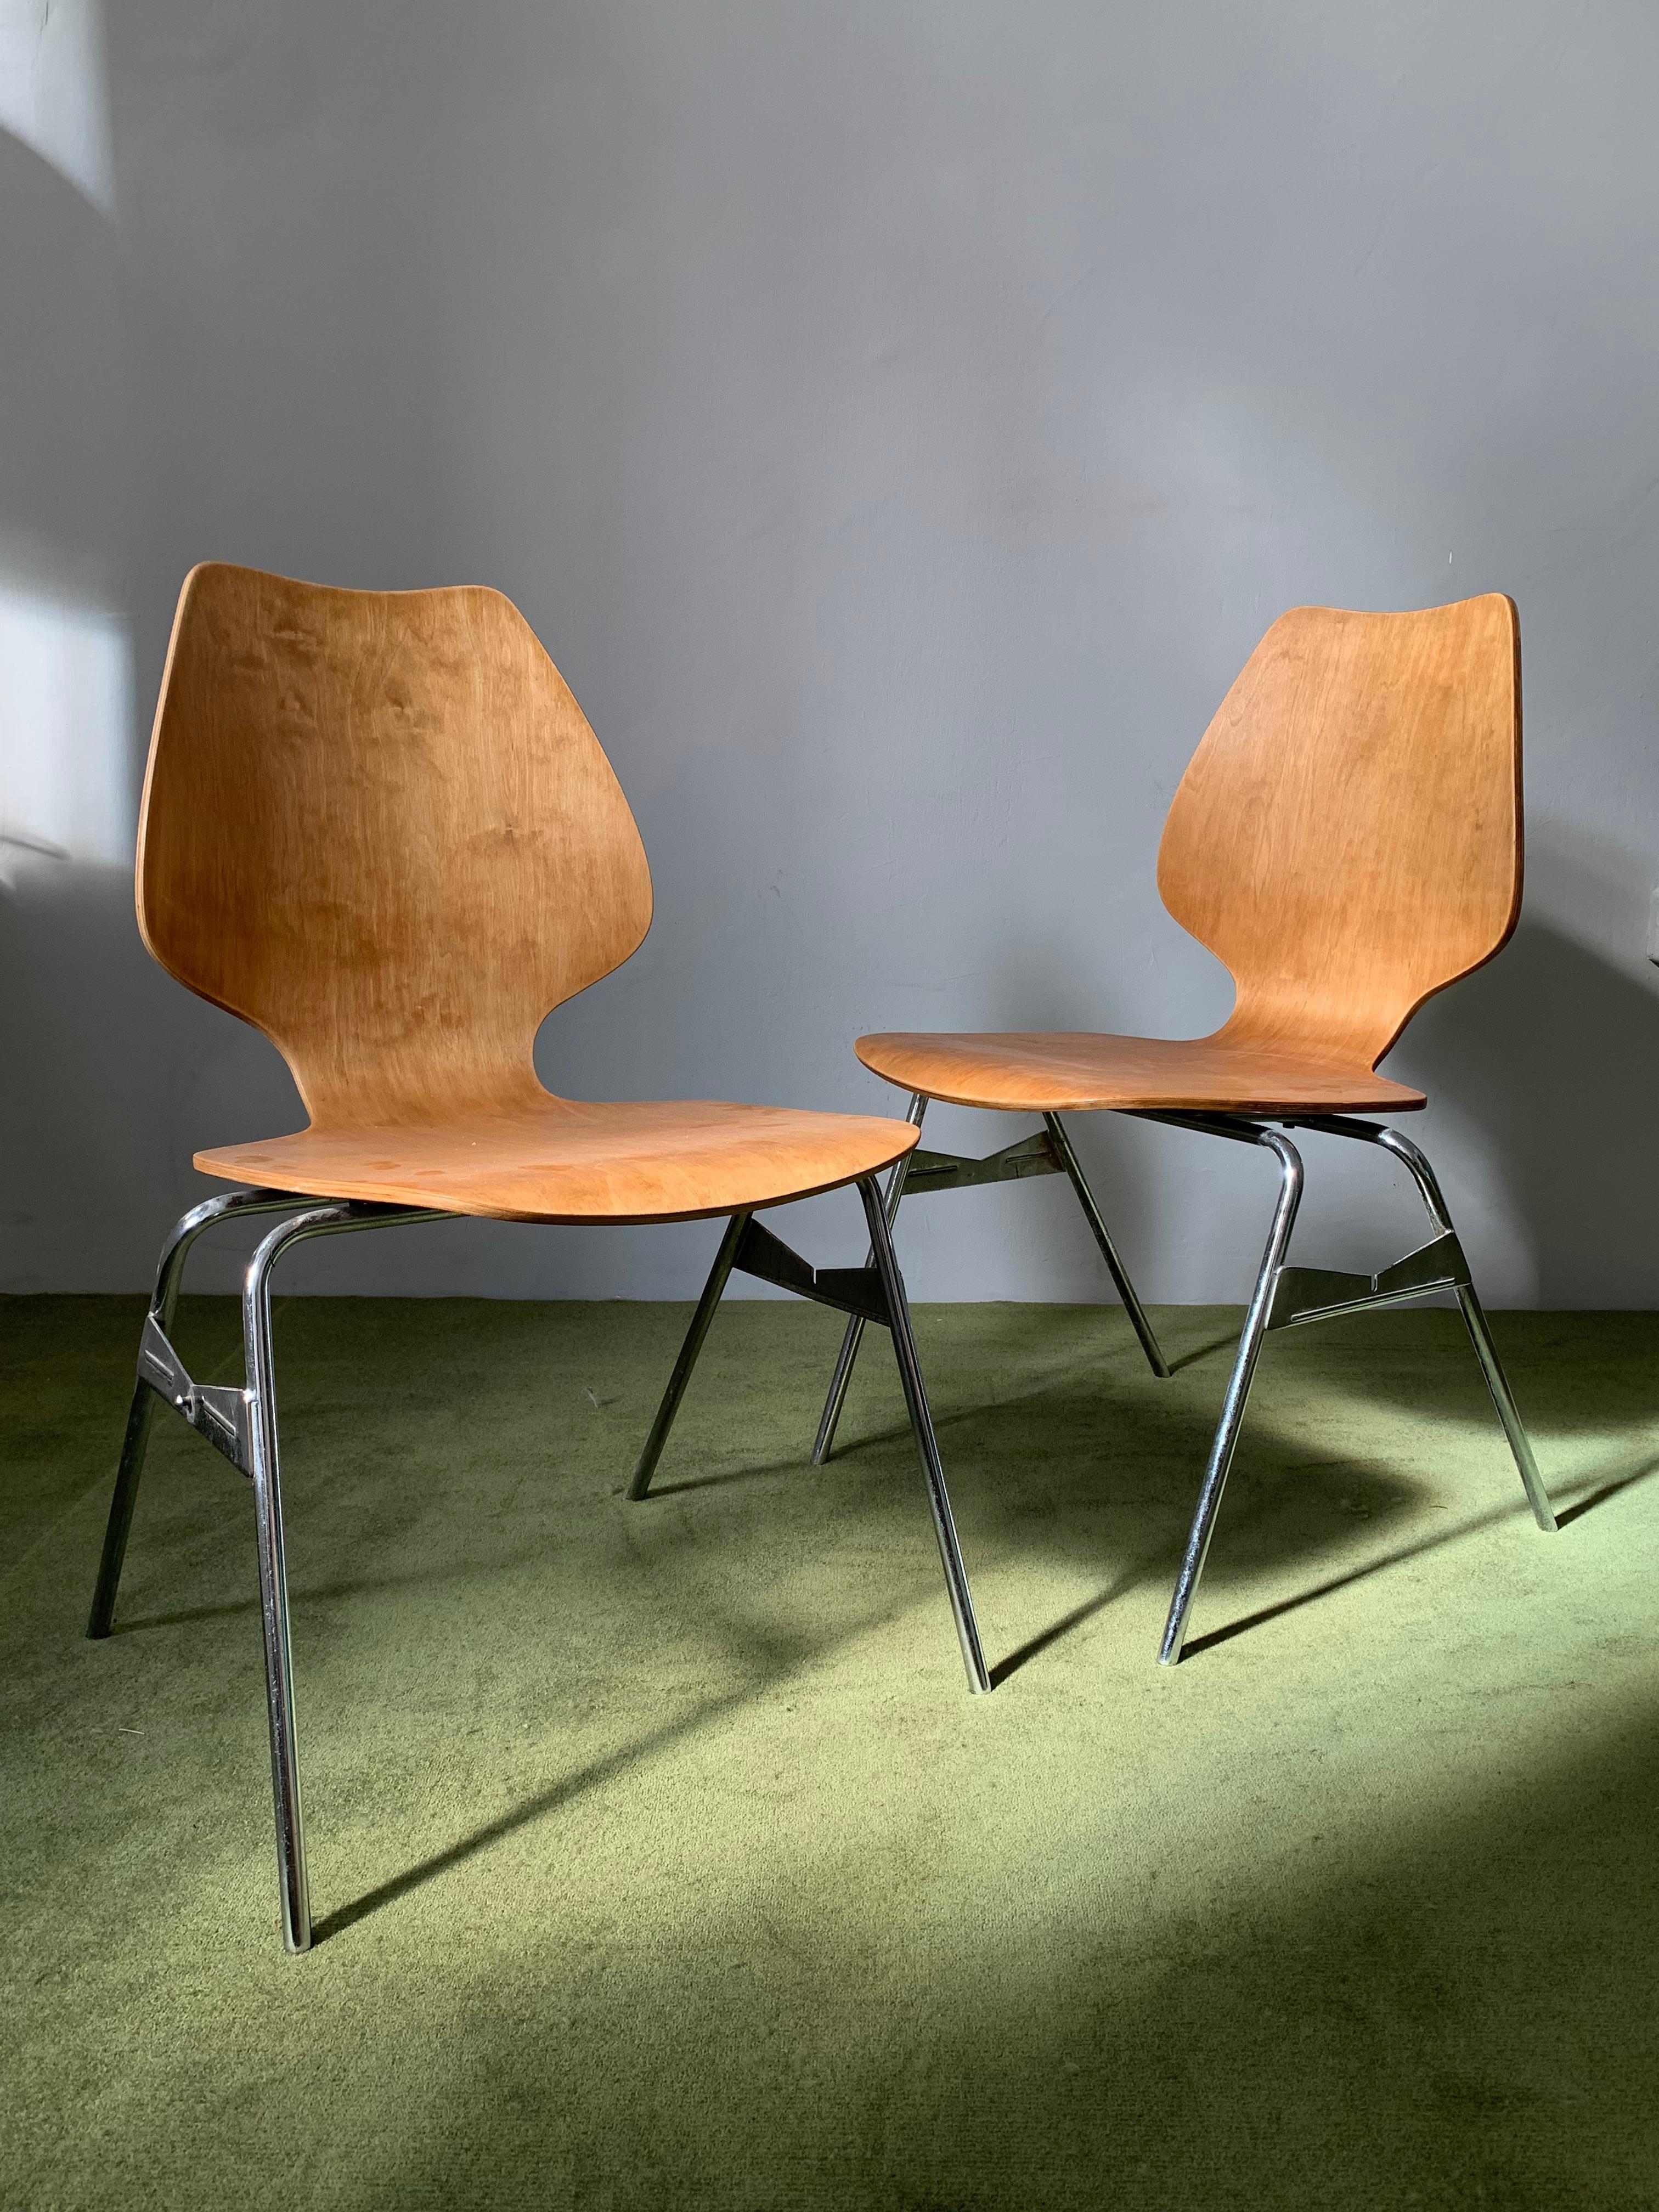 Vintage Swiss Industrial  Design Plywood Stacking Chair by Horgen Glarus 1960's For Sale 5